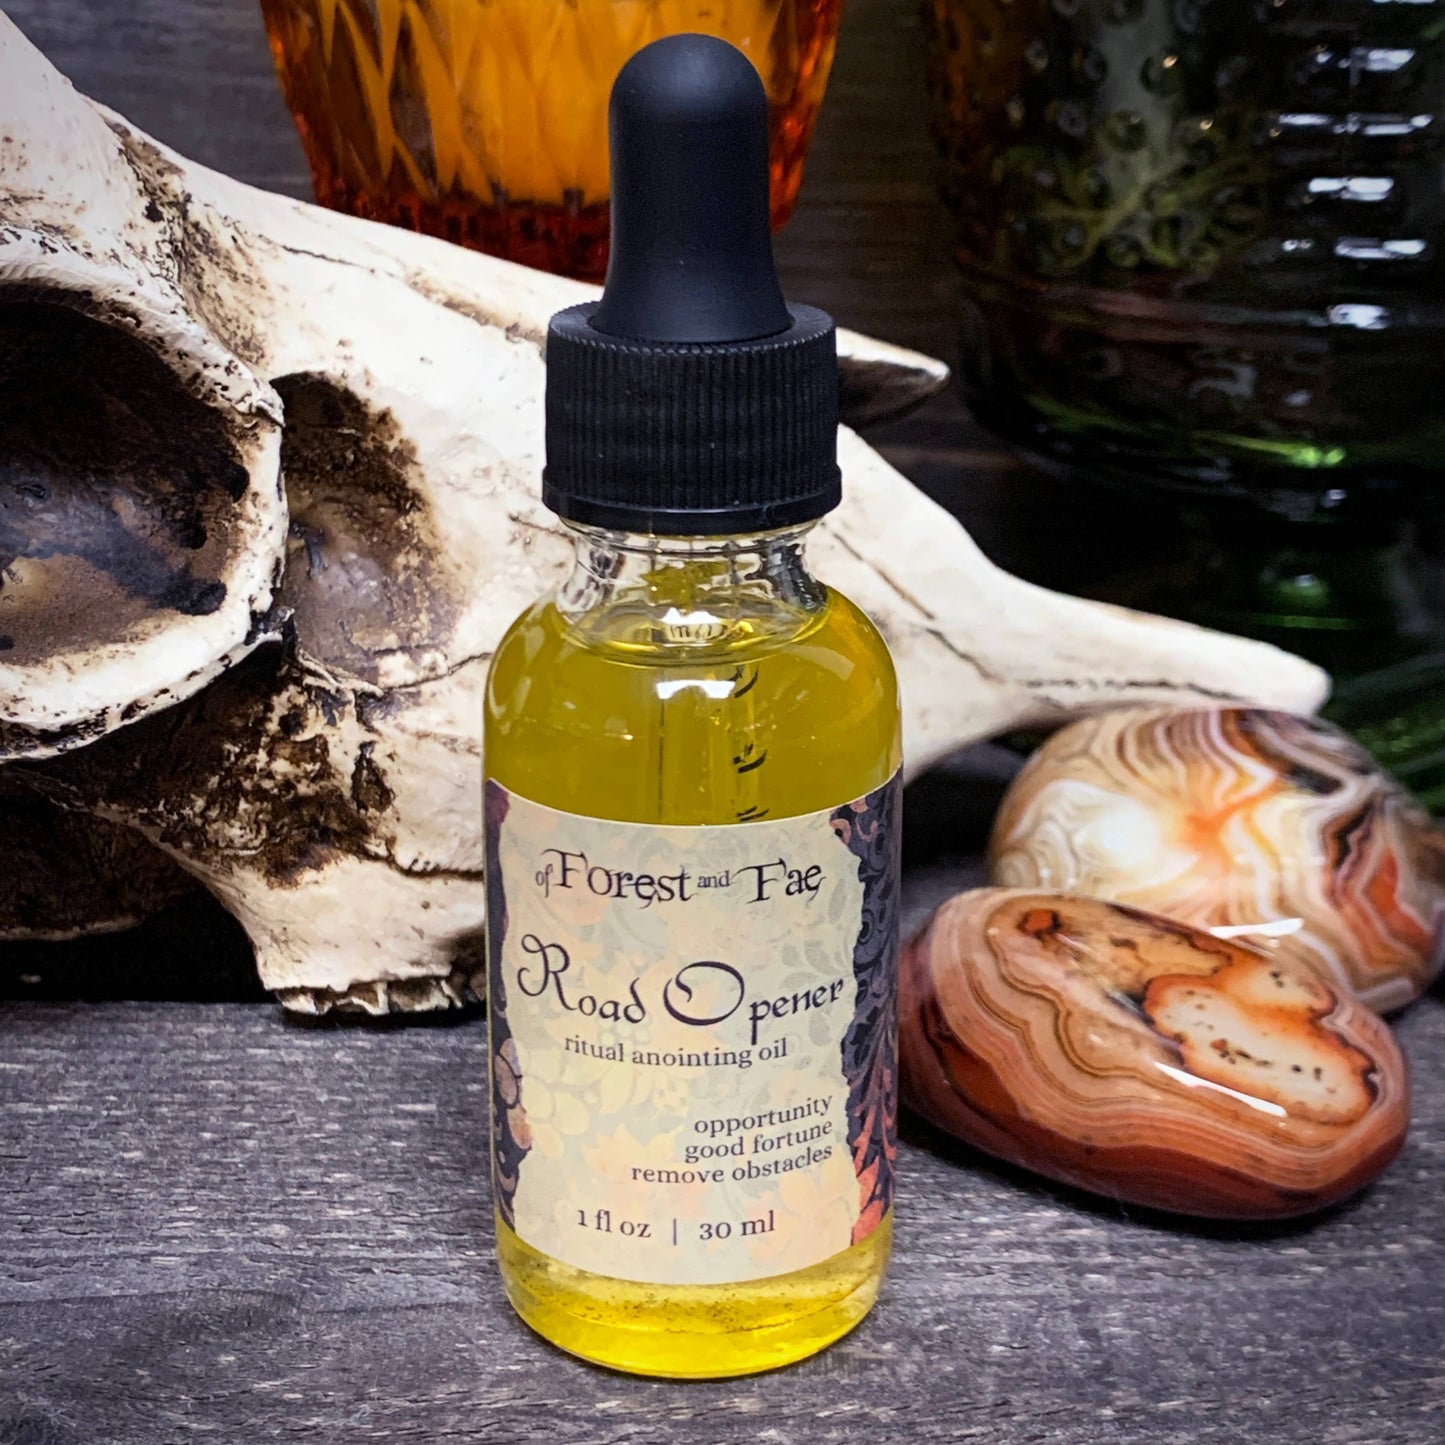 Road Opener Ritual Anointing Oil • Herb Infused Oil • Witchy